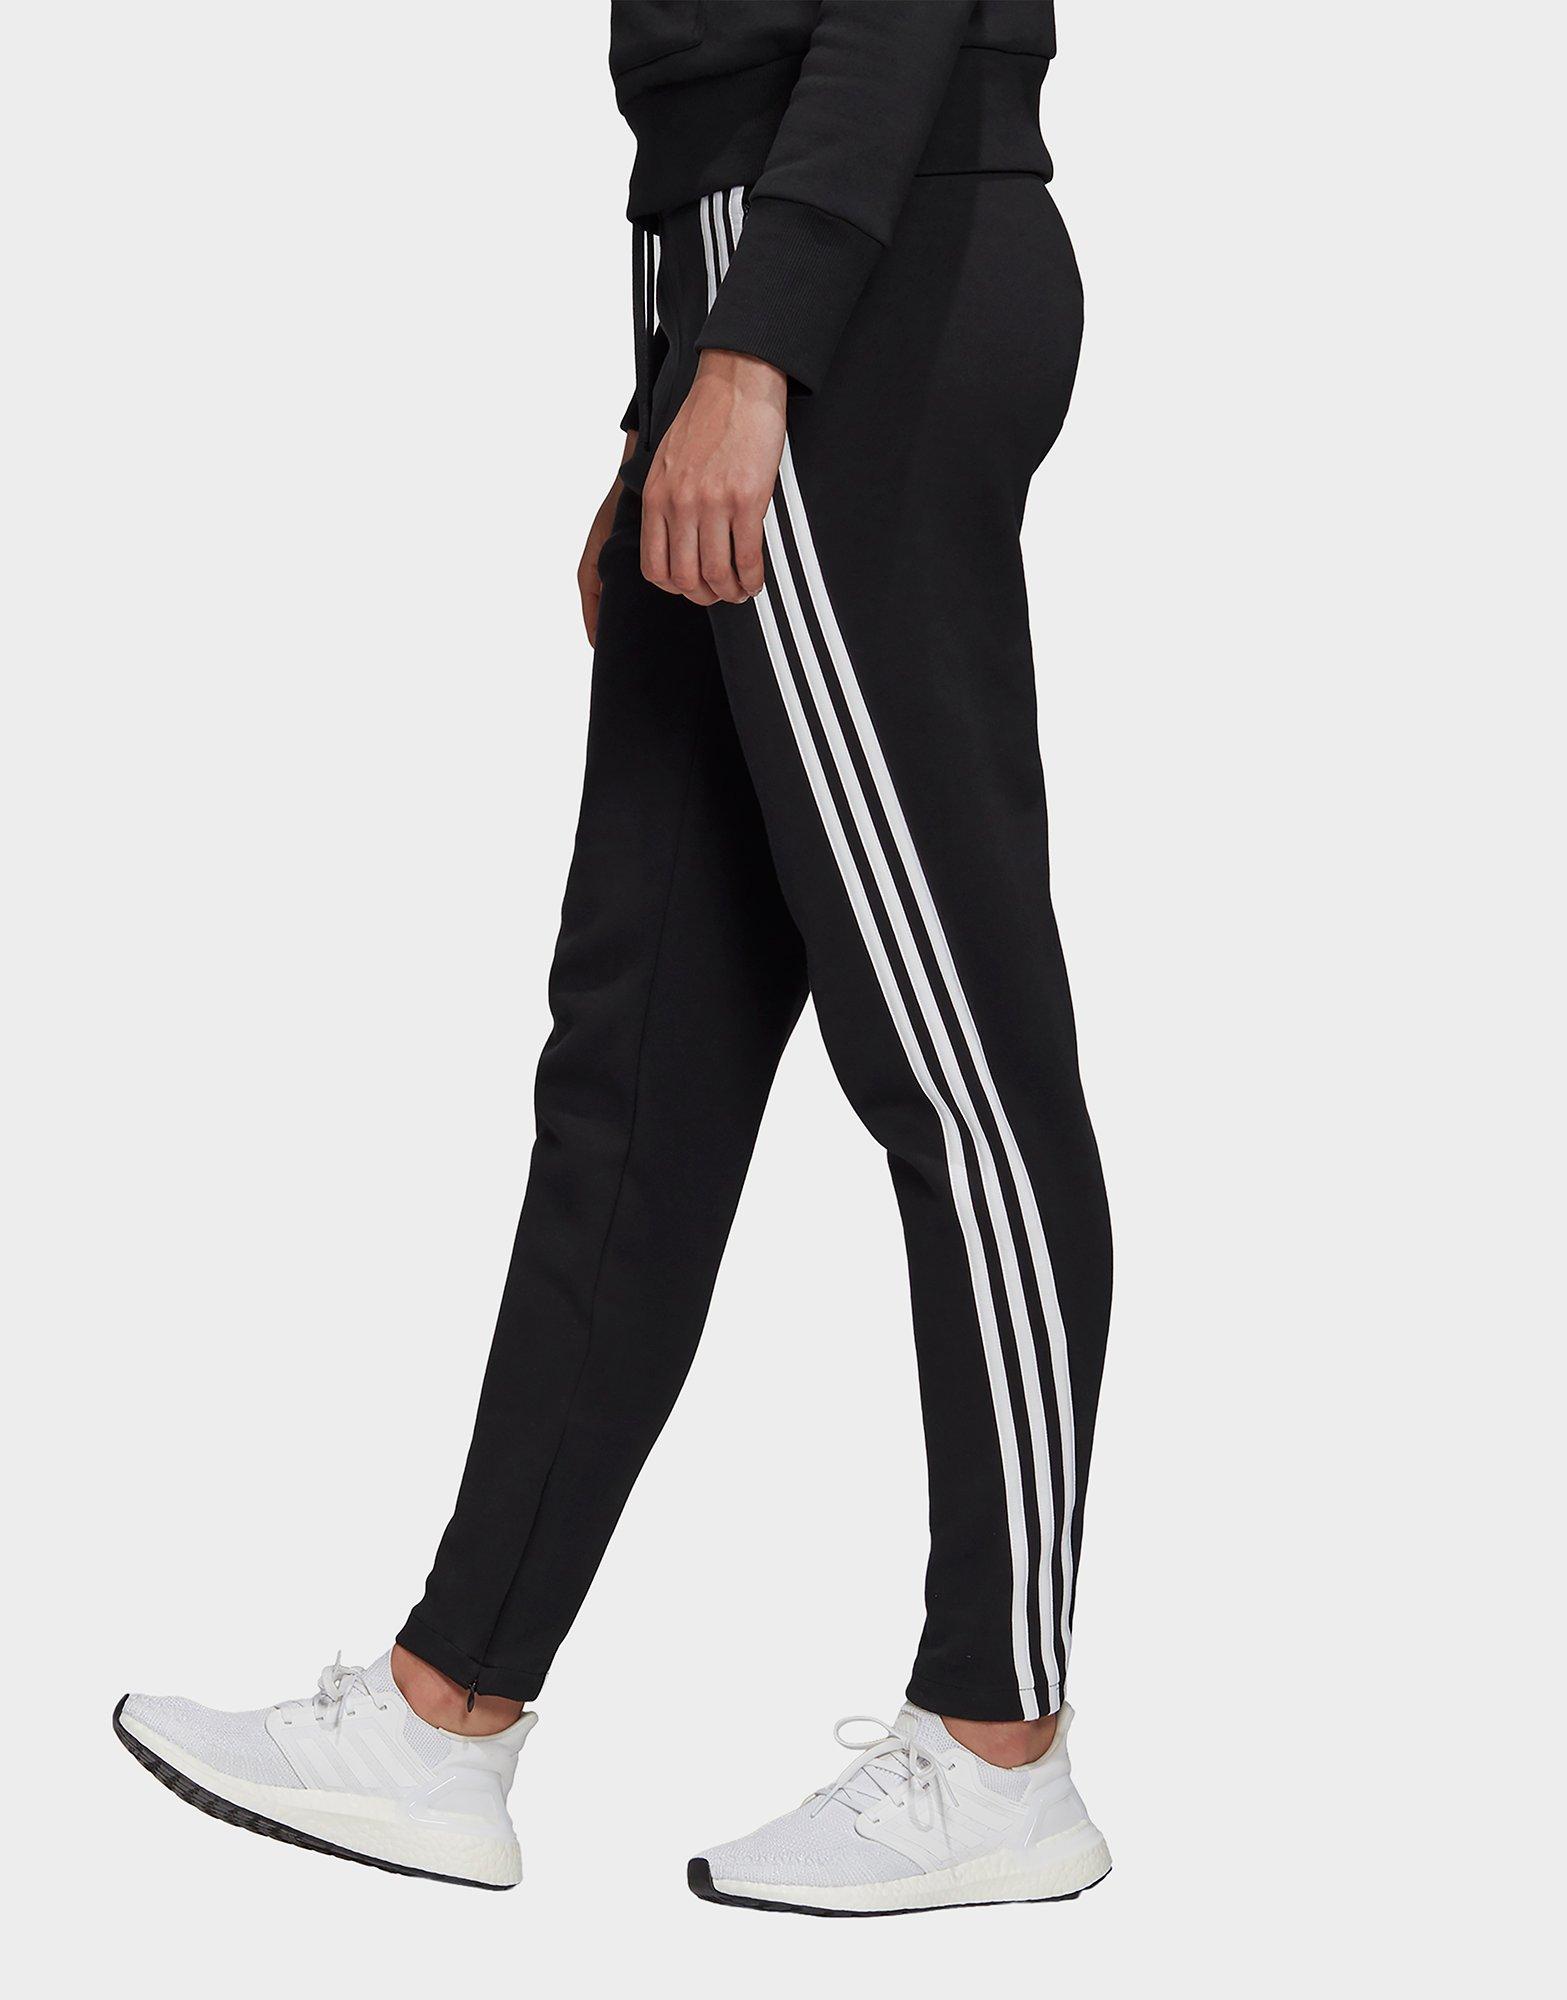 adidas tracksuit bottoms with zip legs